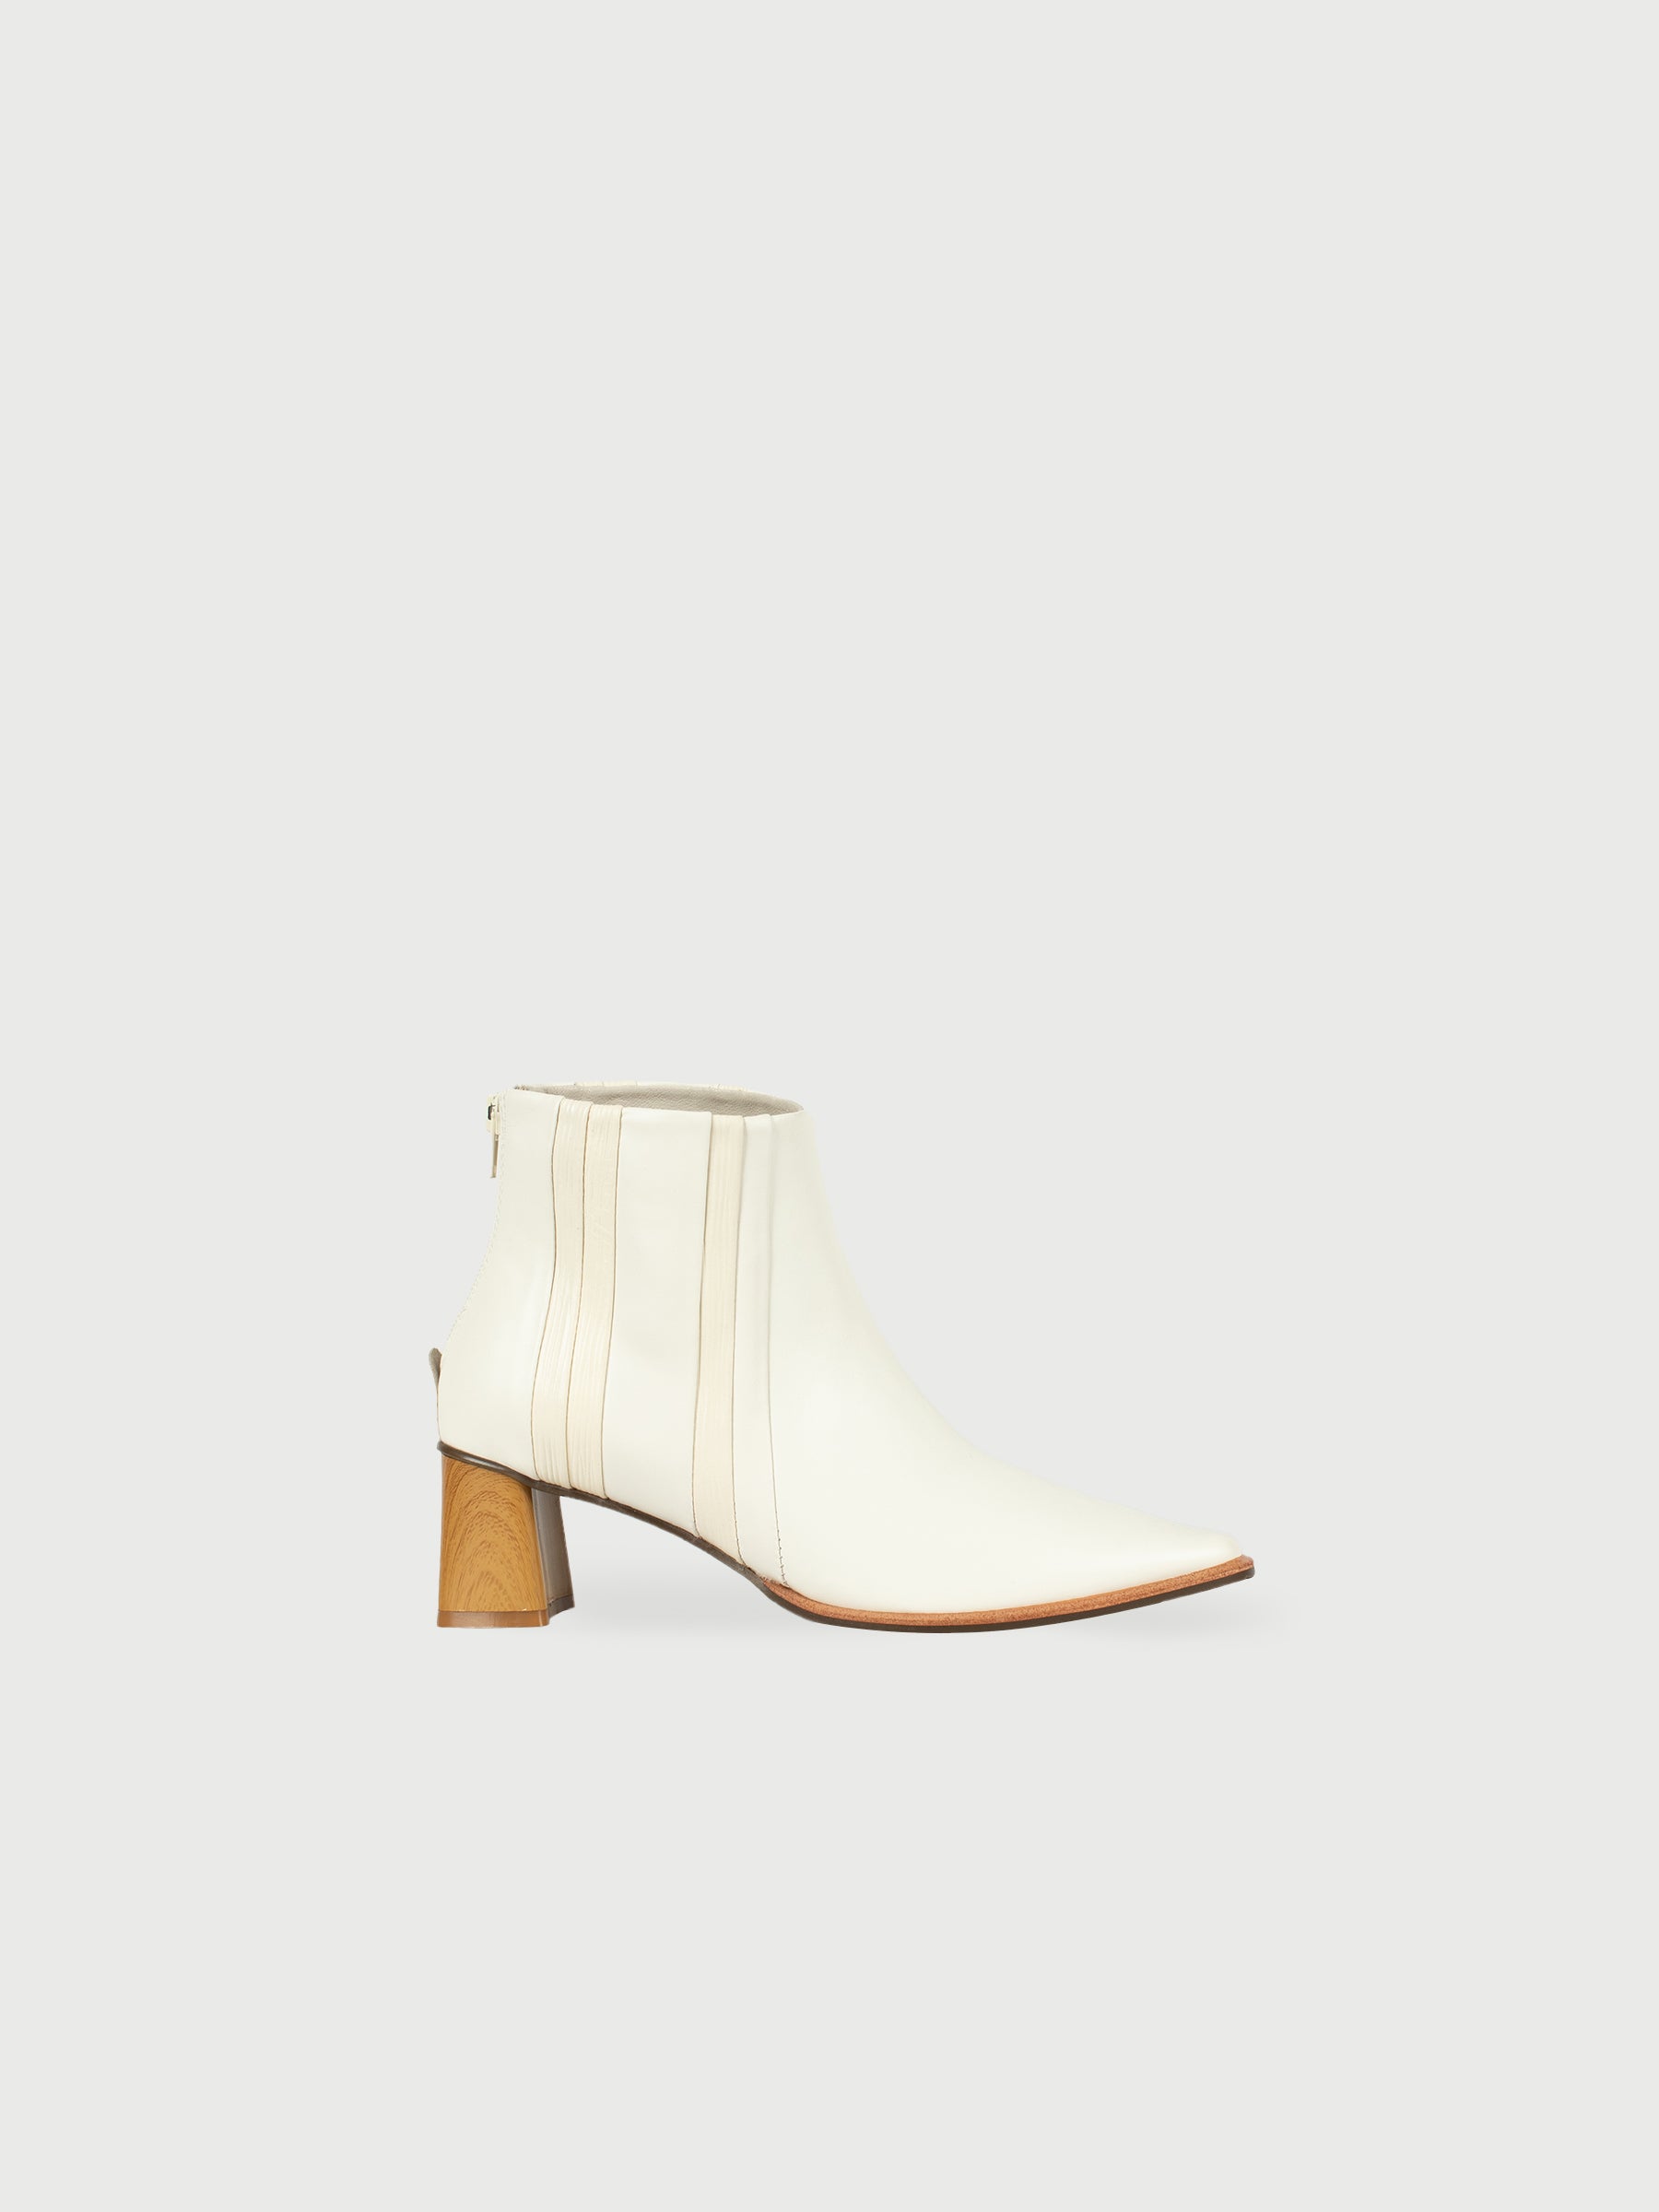 Wooden-Heel Striped Ankle Boots